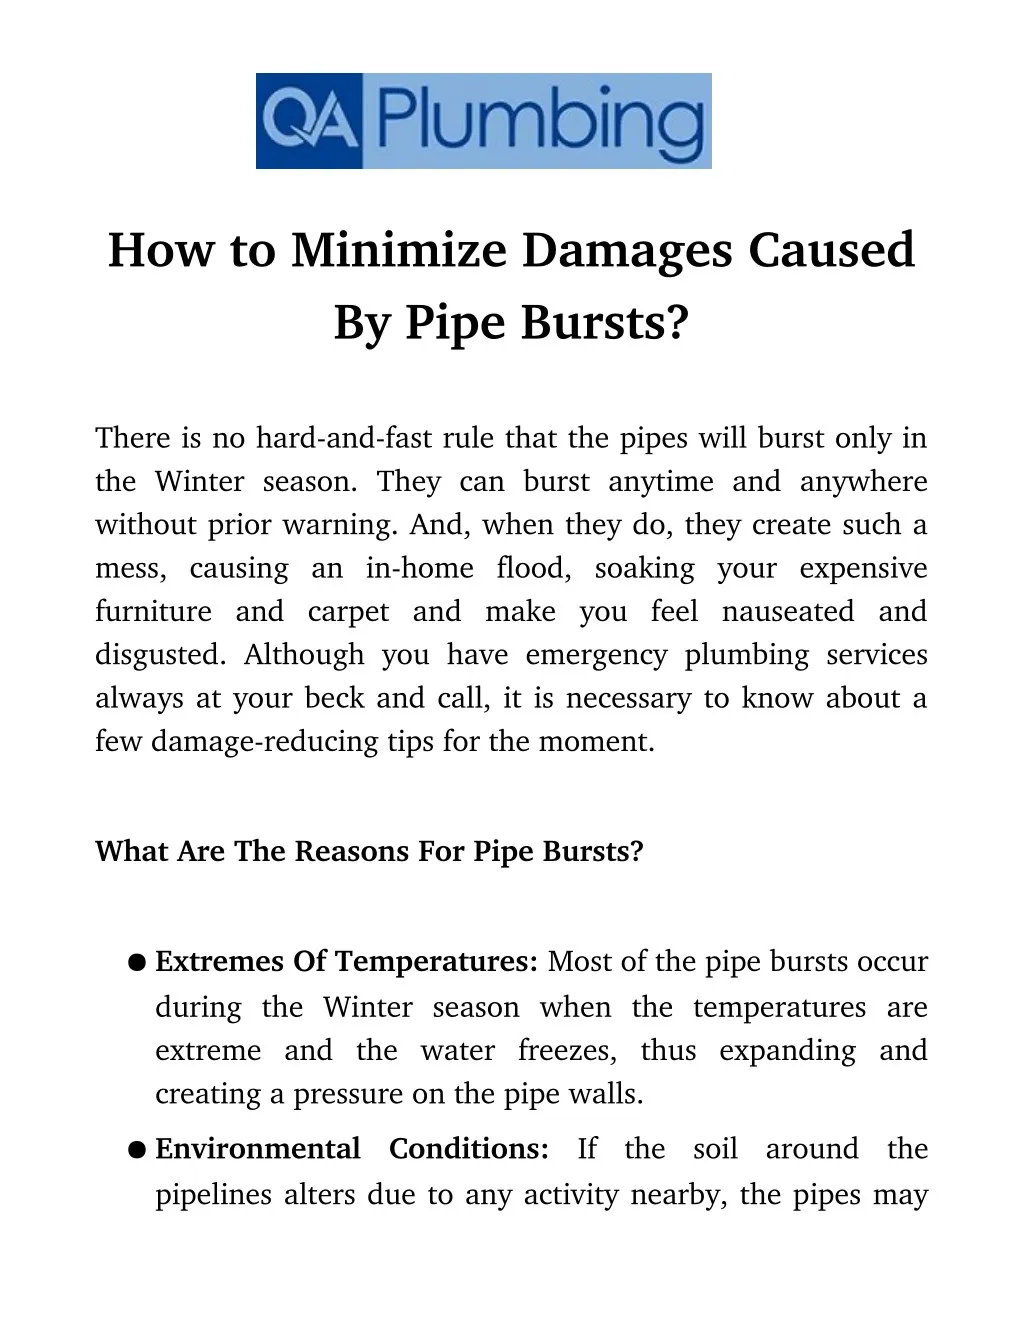 how to minimize damages caused by pipe bursts